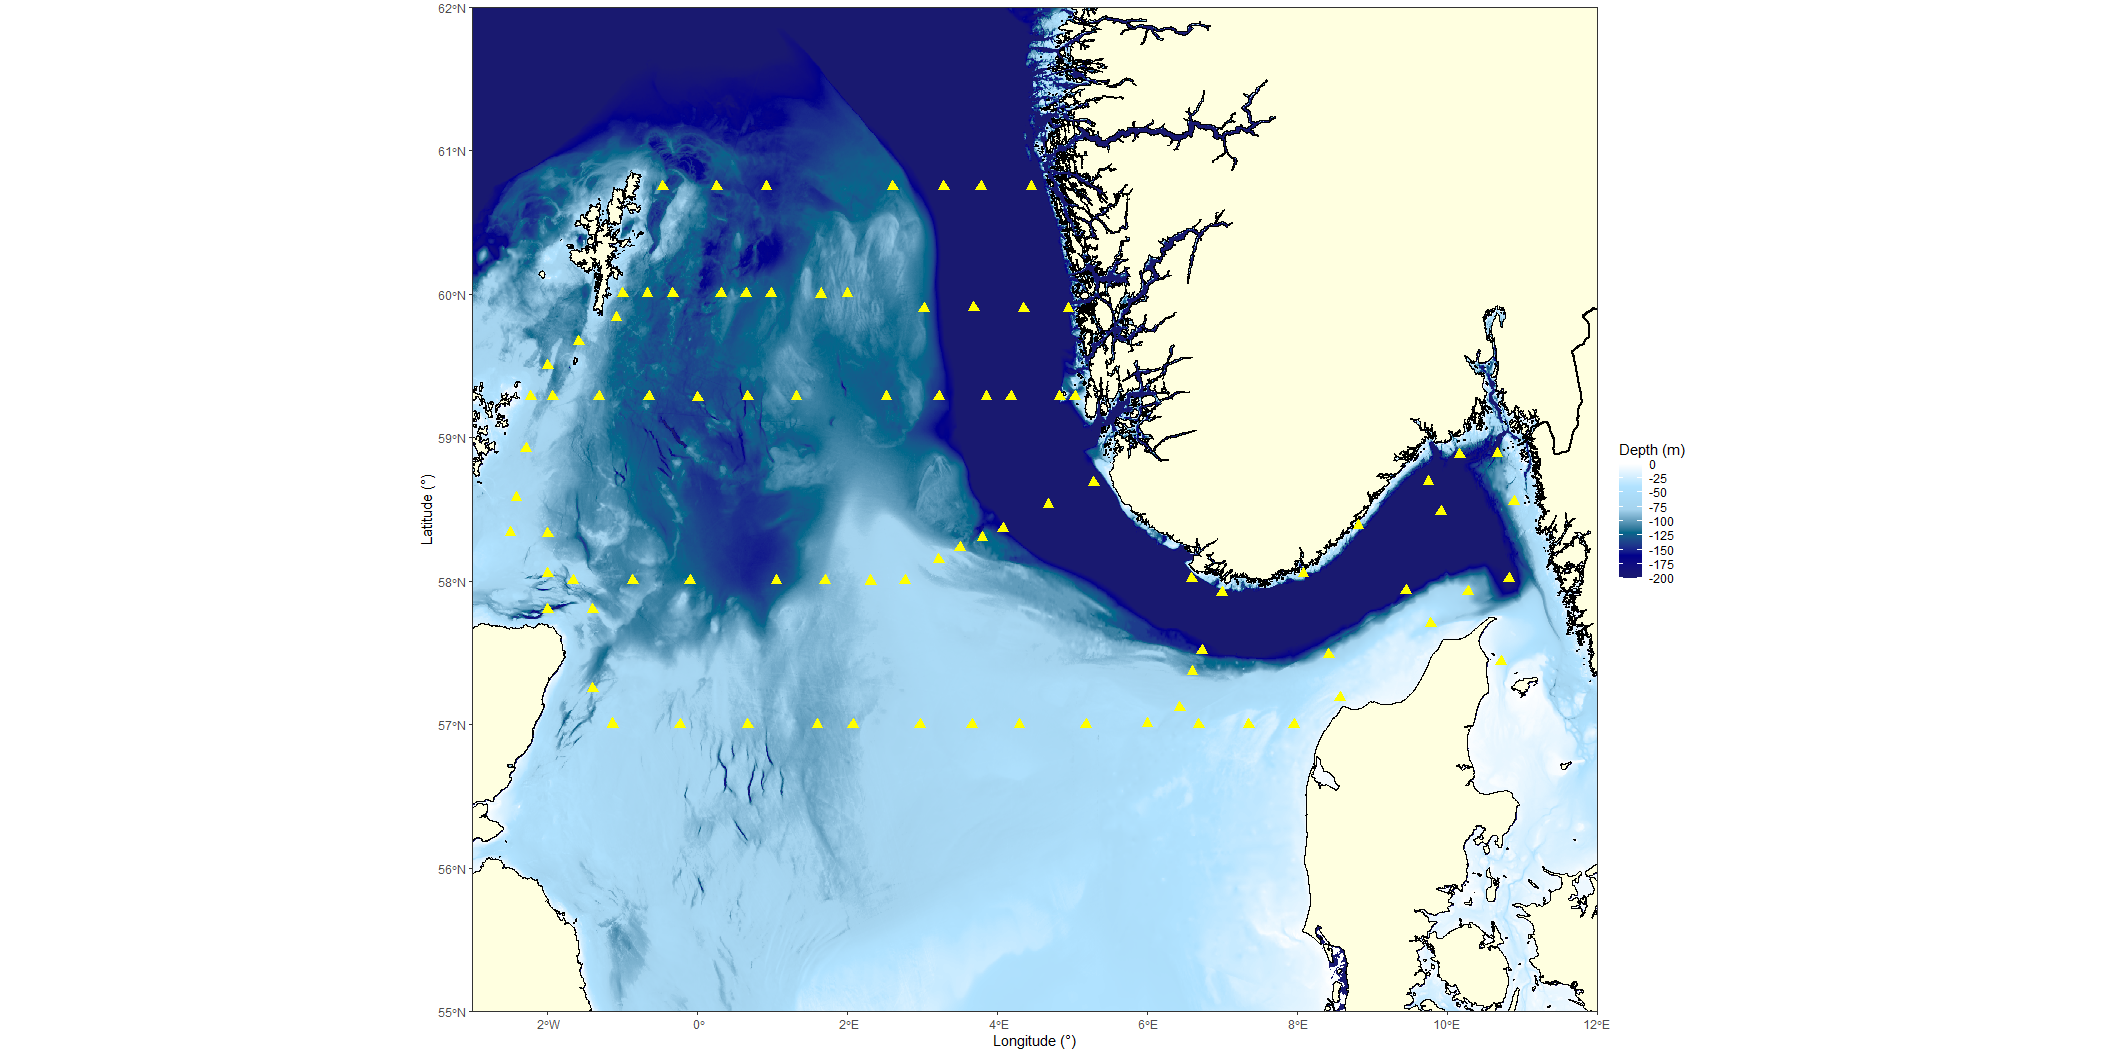 Figure 4: Executed GULF VII tows during the 2023 North Sea Ecosystem Survey. A total of 89 tows were conducted across the survey area. The underlying map shows the bathygraphy of the northern North Sea, with depths deeper than 200 m depicted in the same color.